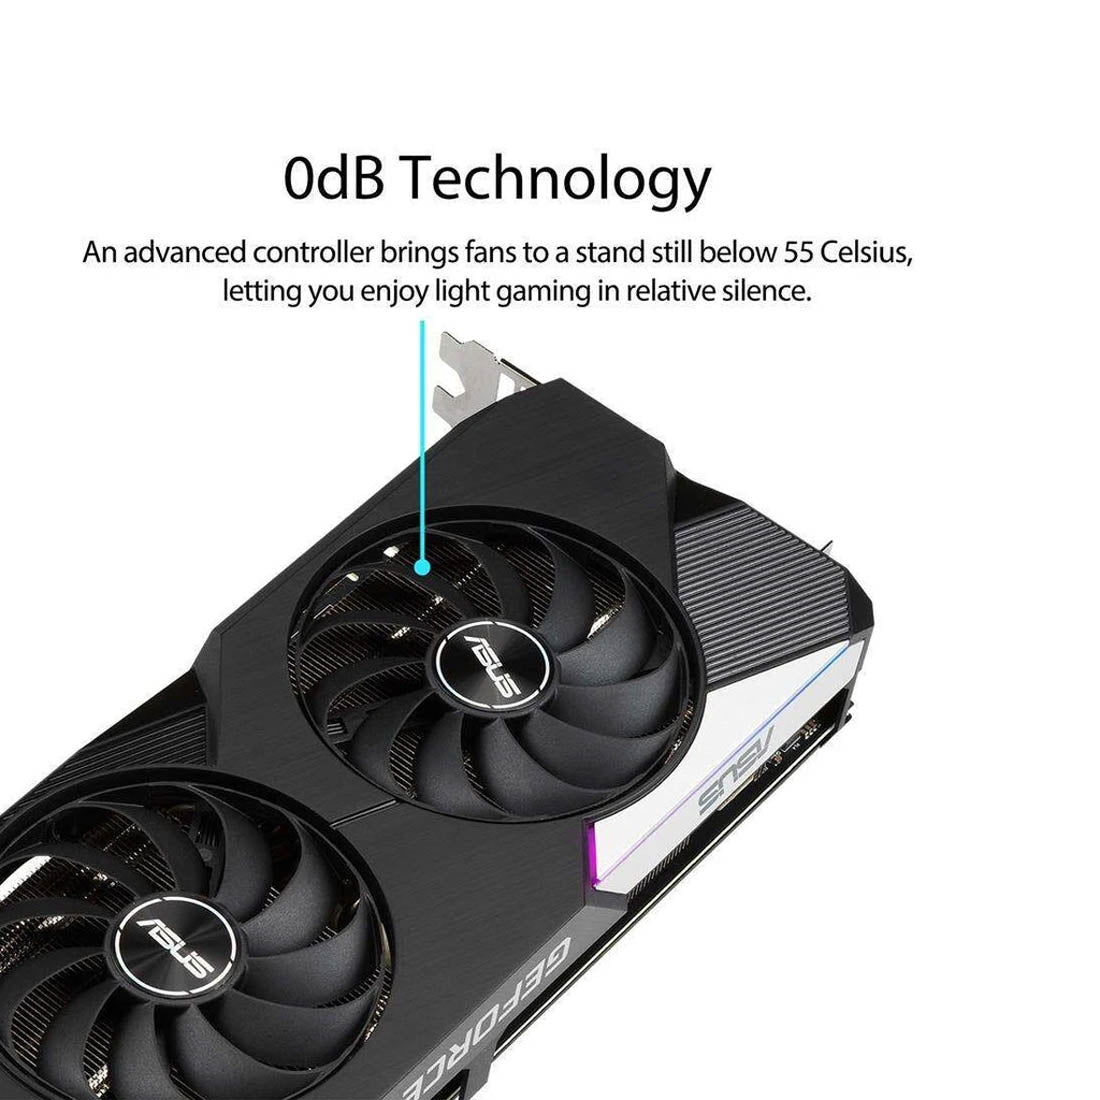 ASUS Dual RTX 3060 Ti OC LHR V2 Edition 8GB GDDR6 256-Bit Graphics card with DLSS AI Rendering